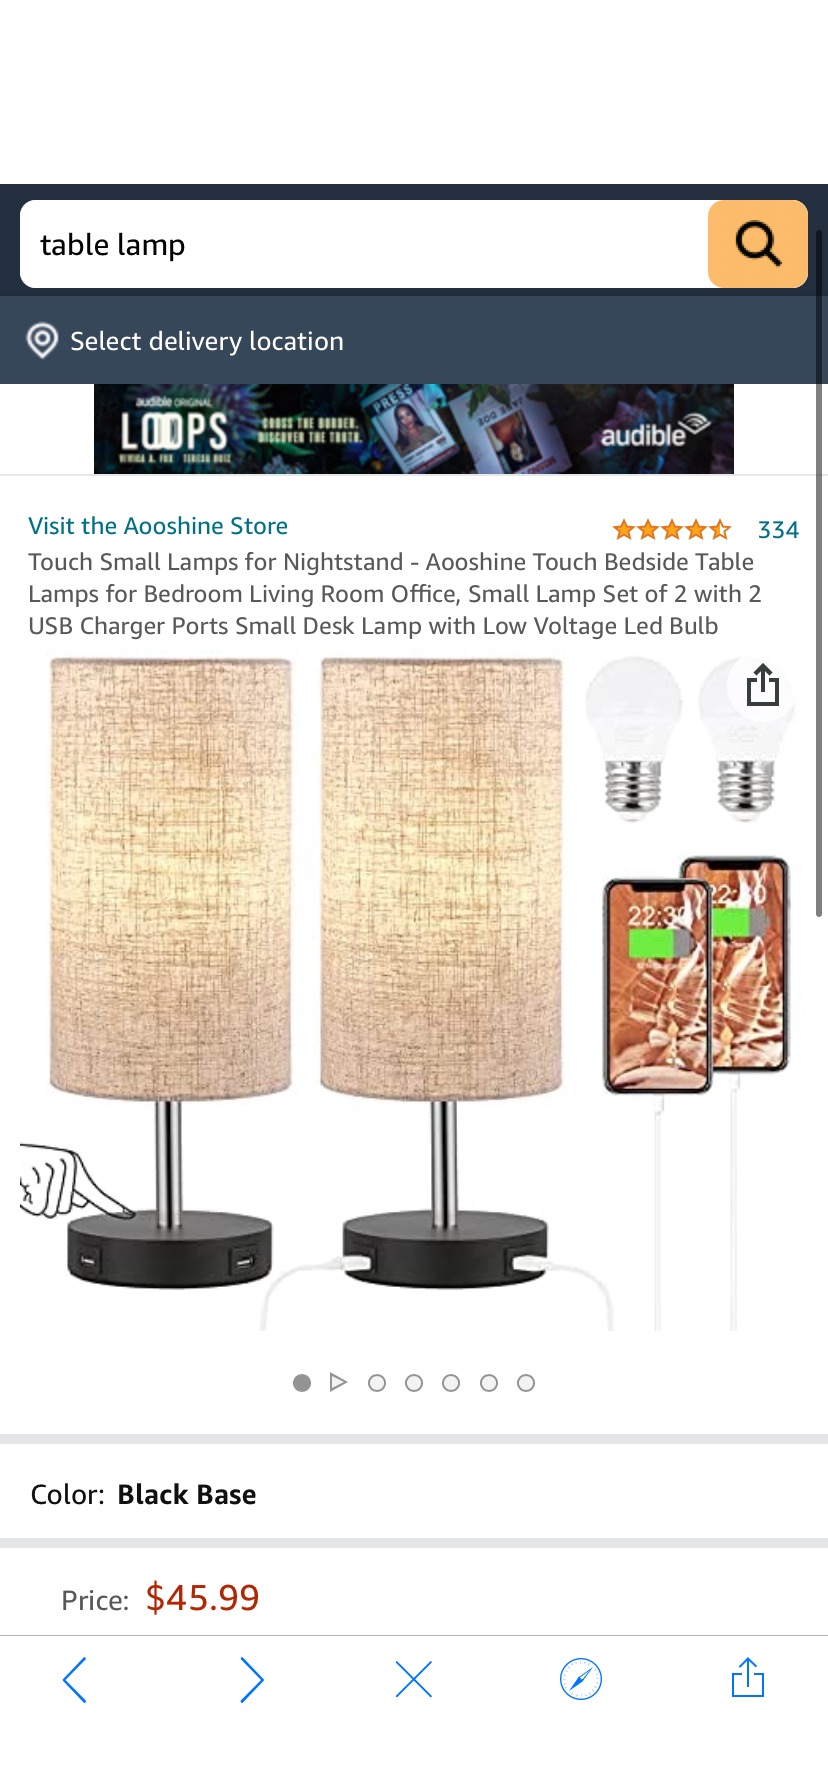 Amazon.com: Touch Small Lamps 台灯for Nightstand - Aooshine Touch Bedside Table Lamps for Bedroom Living Room Office, Small Lamp Set of 2 with 2 USB Charger Ports Small Desk Lamp with